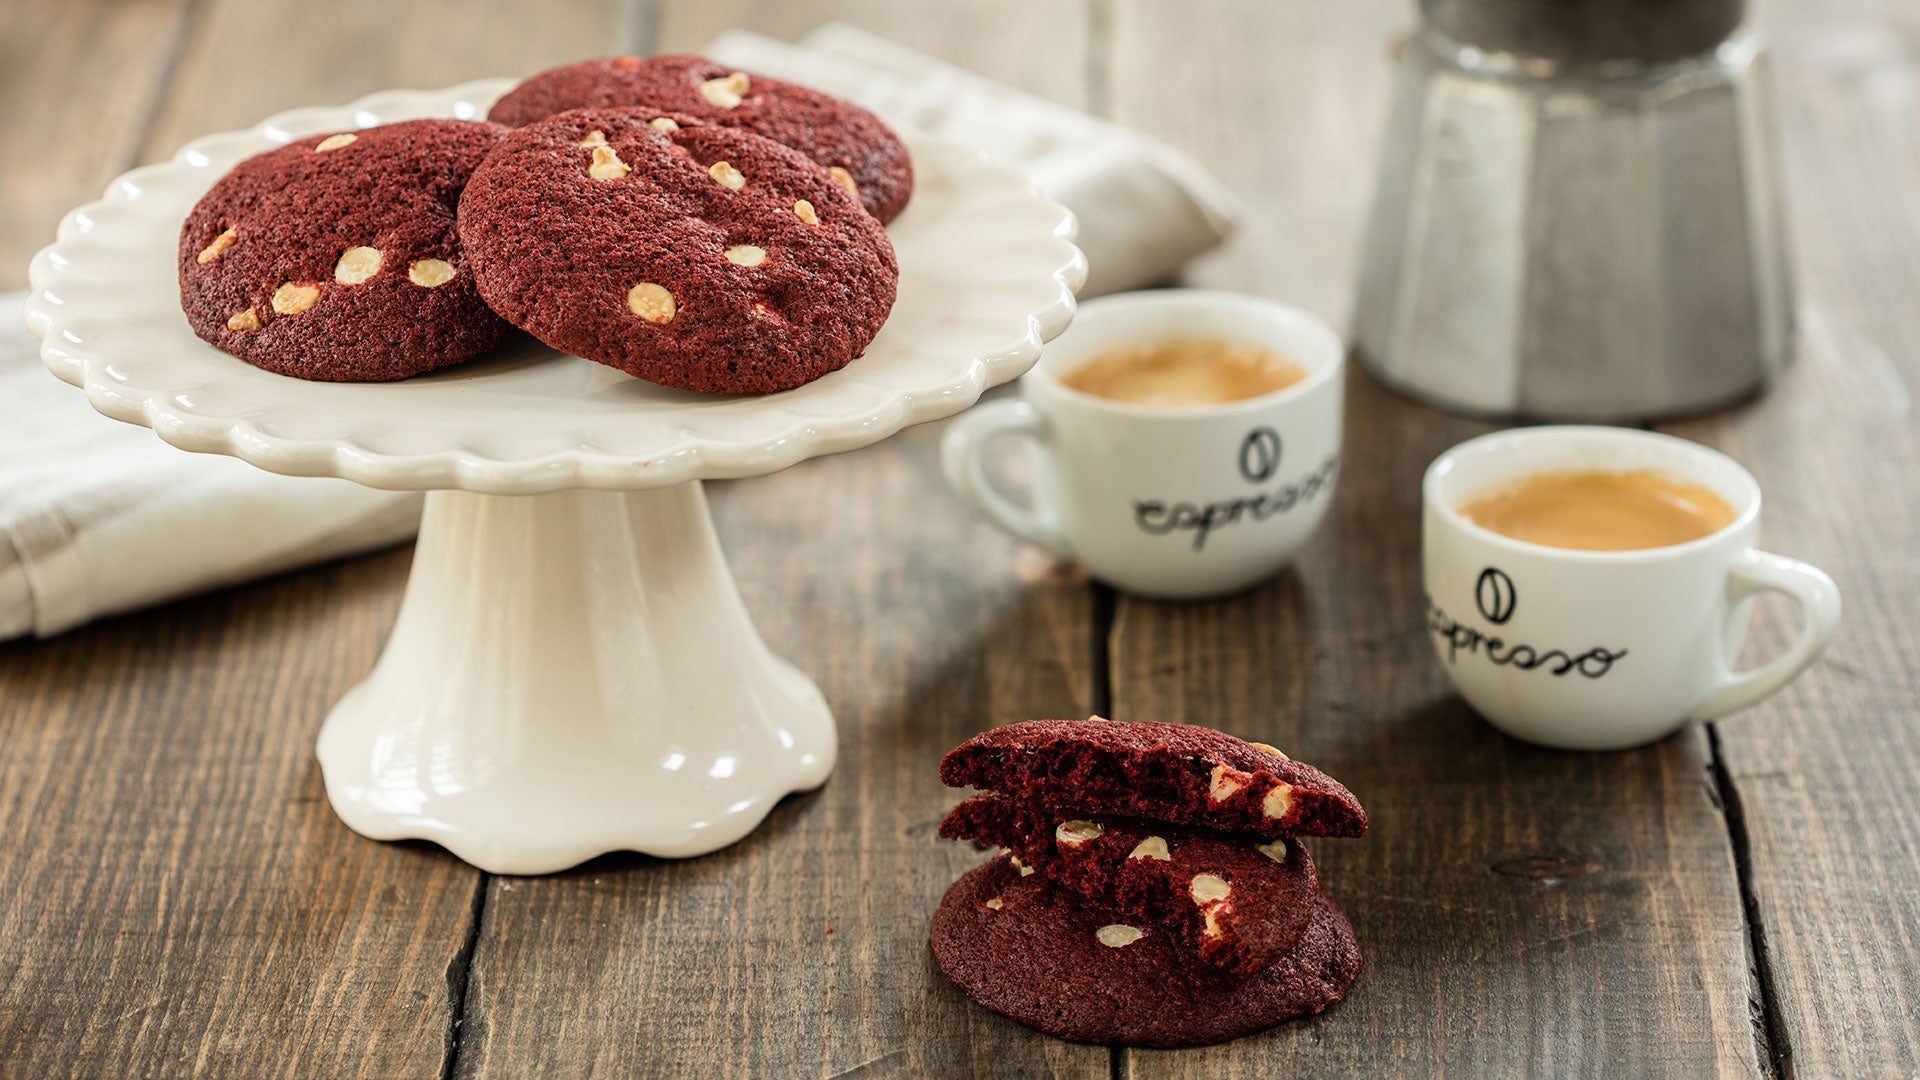 Red velvet cookies with white chocolate chips on a white cake stand next to two cups of coffee